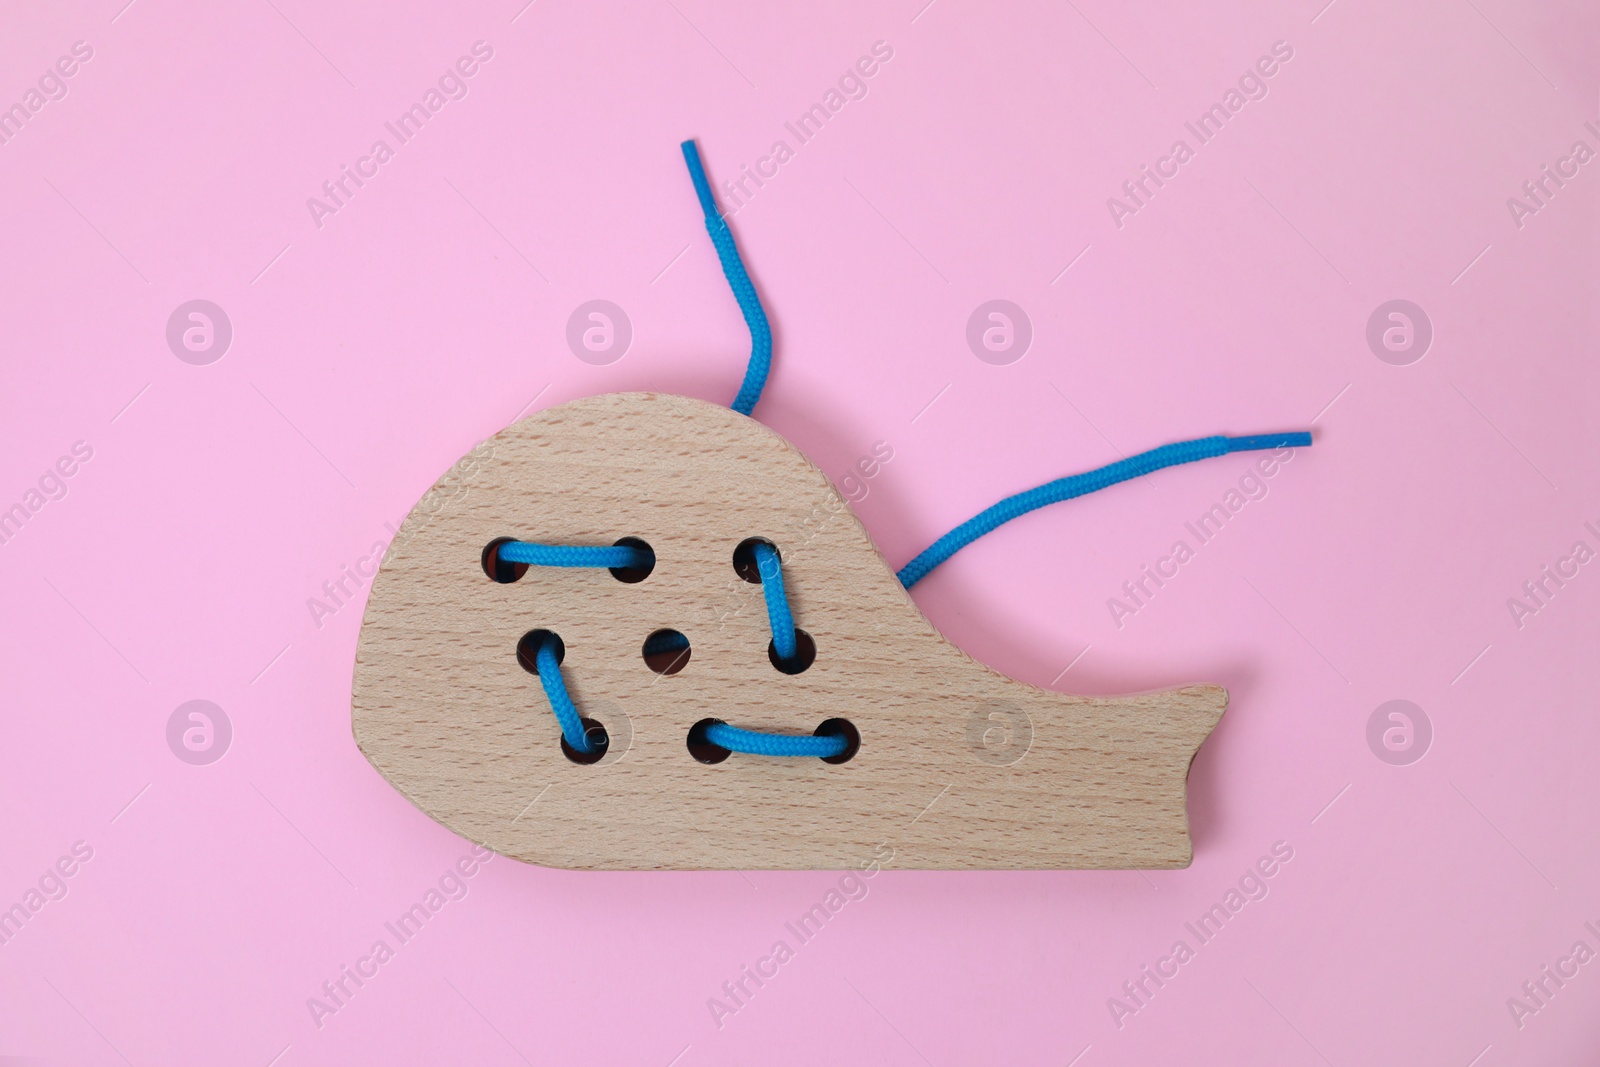 Photo of Wooden whale figure with holes and lace on pink background, top view. Educational toy for motor skills development